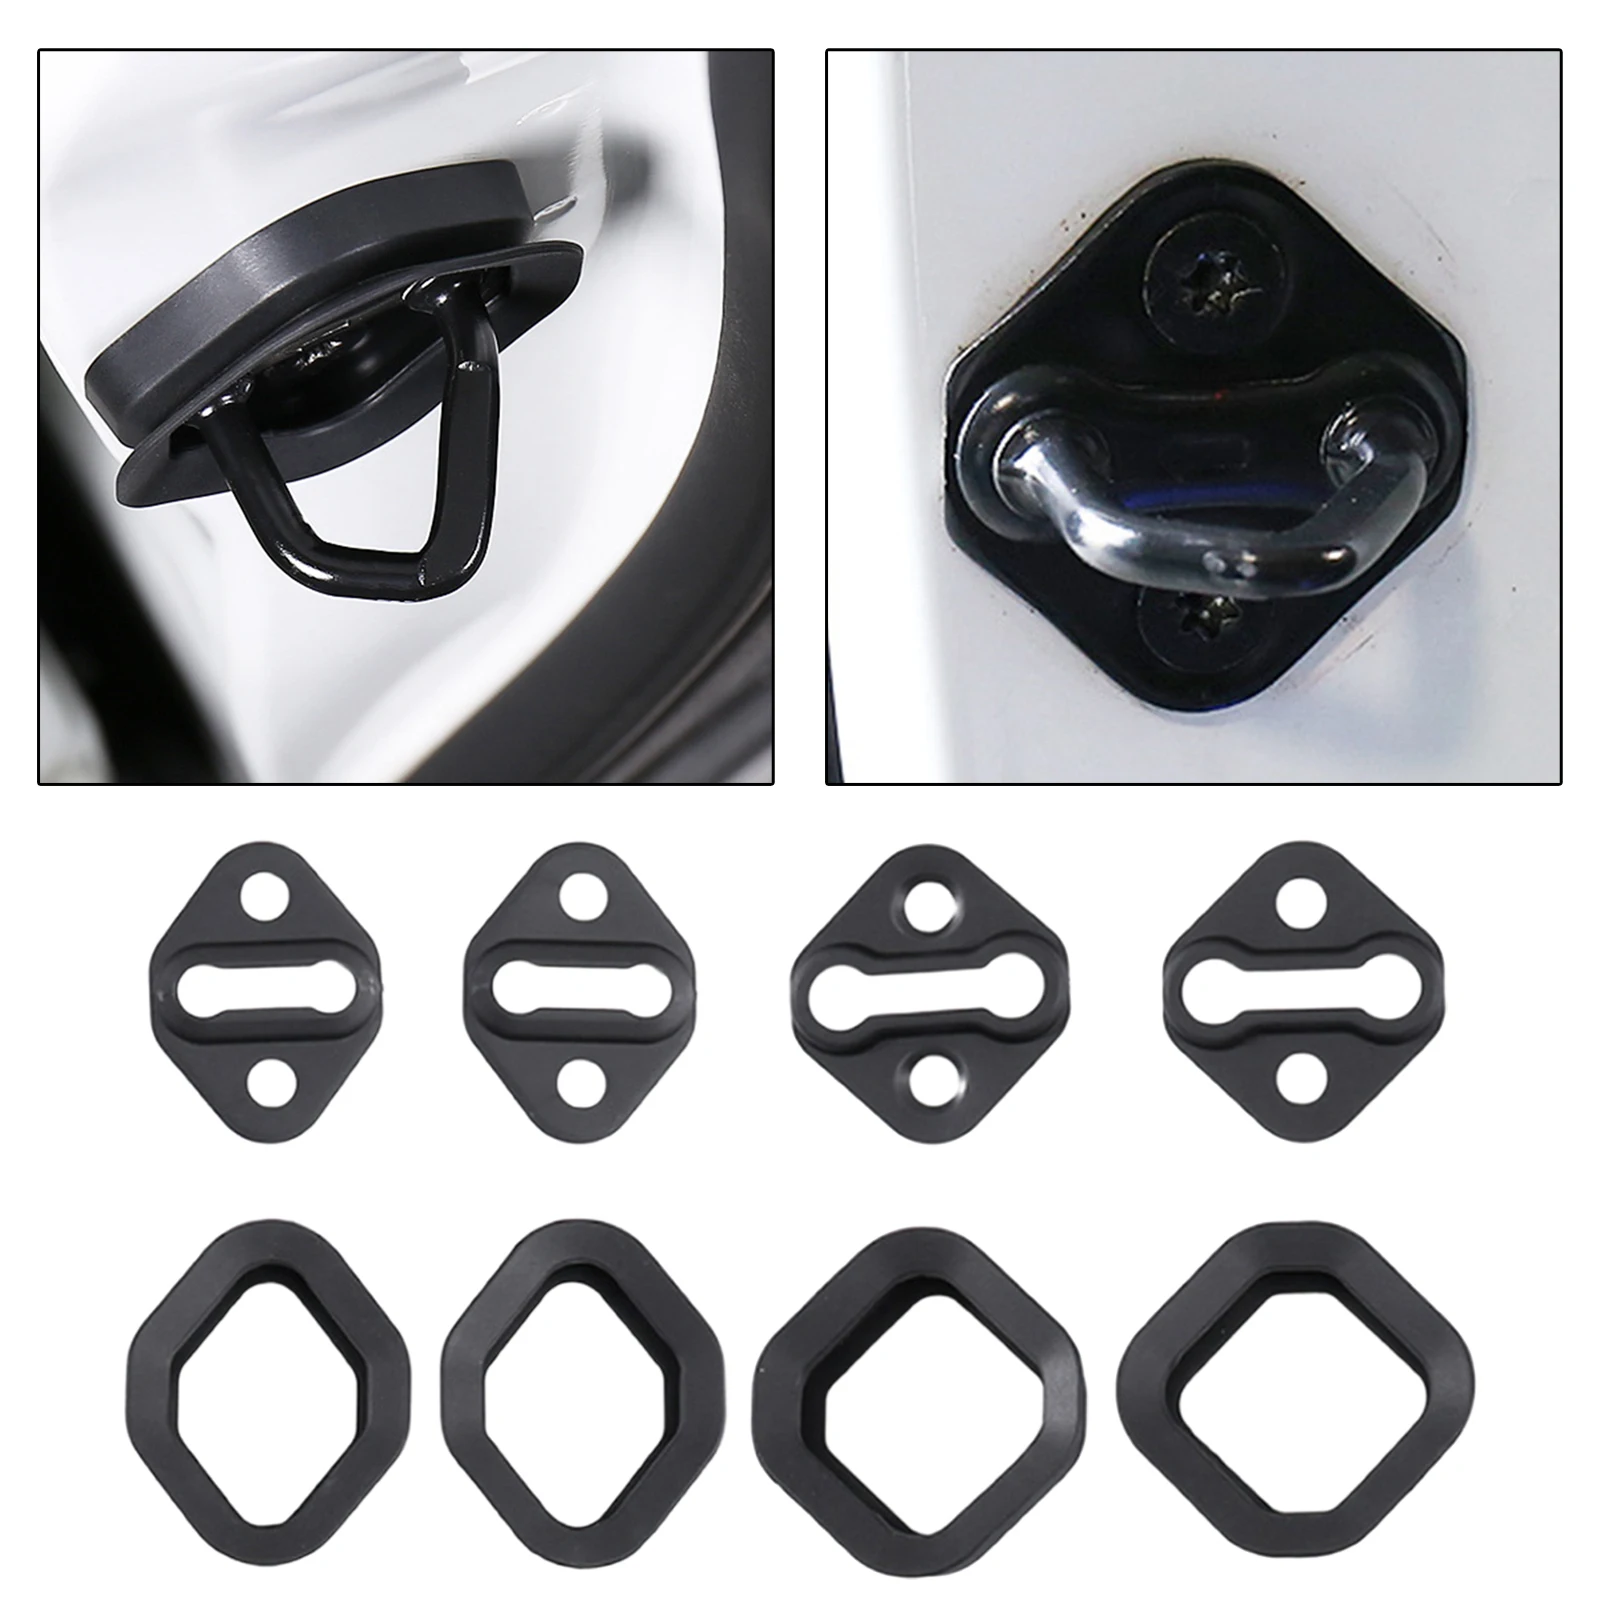 4-Pack Door Lock latches Striker Cover Protective for Honda Elysion